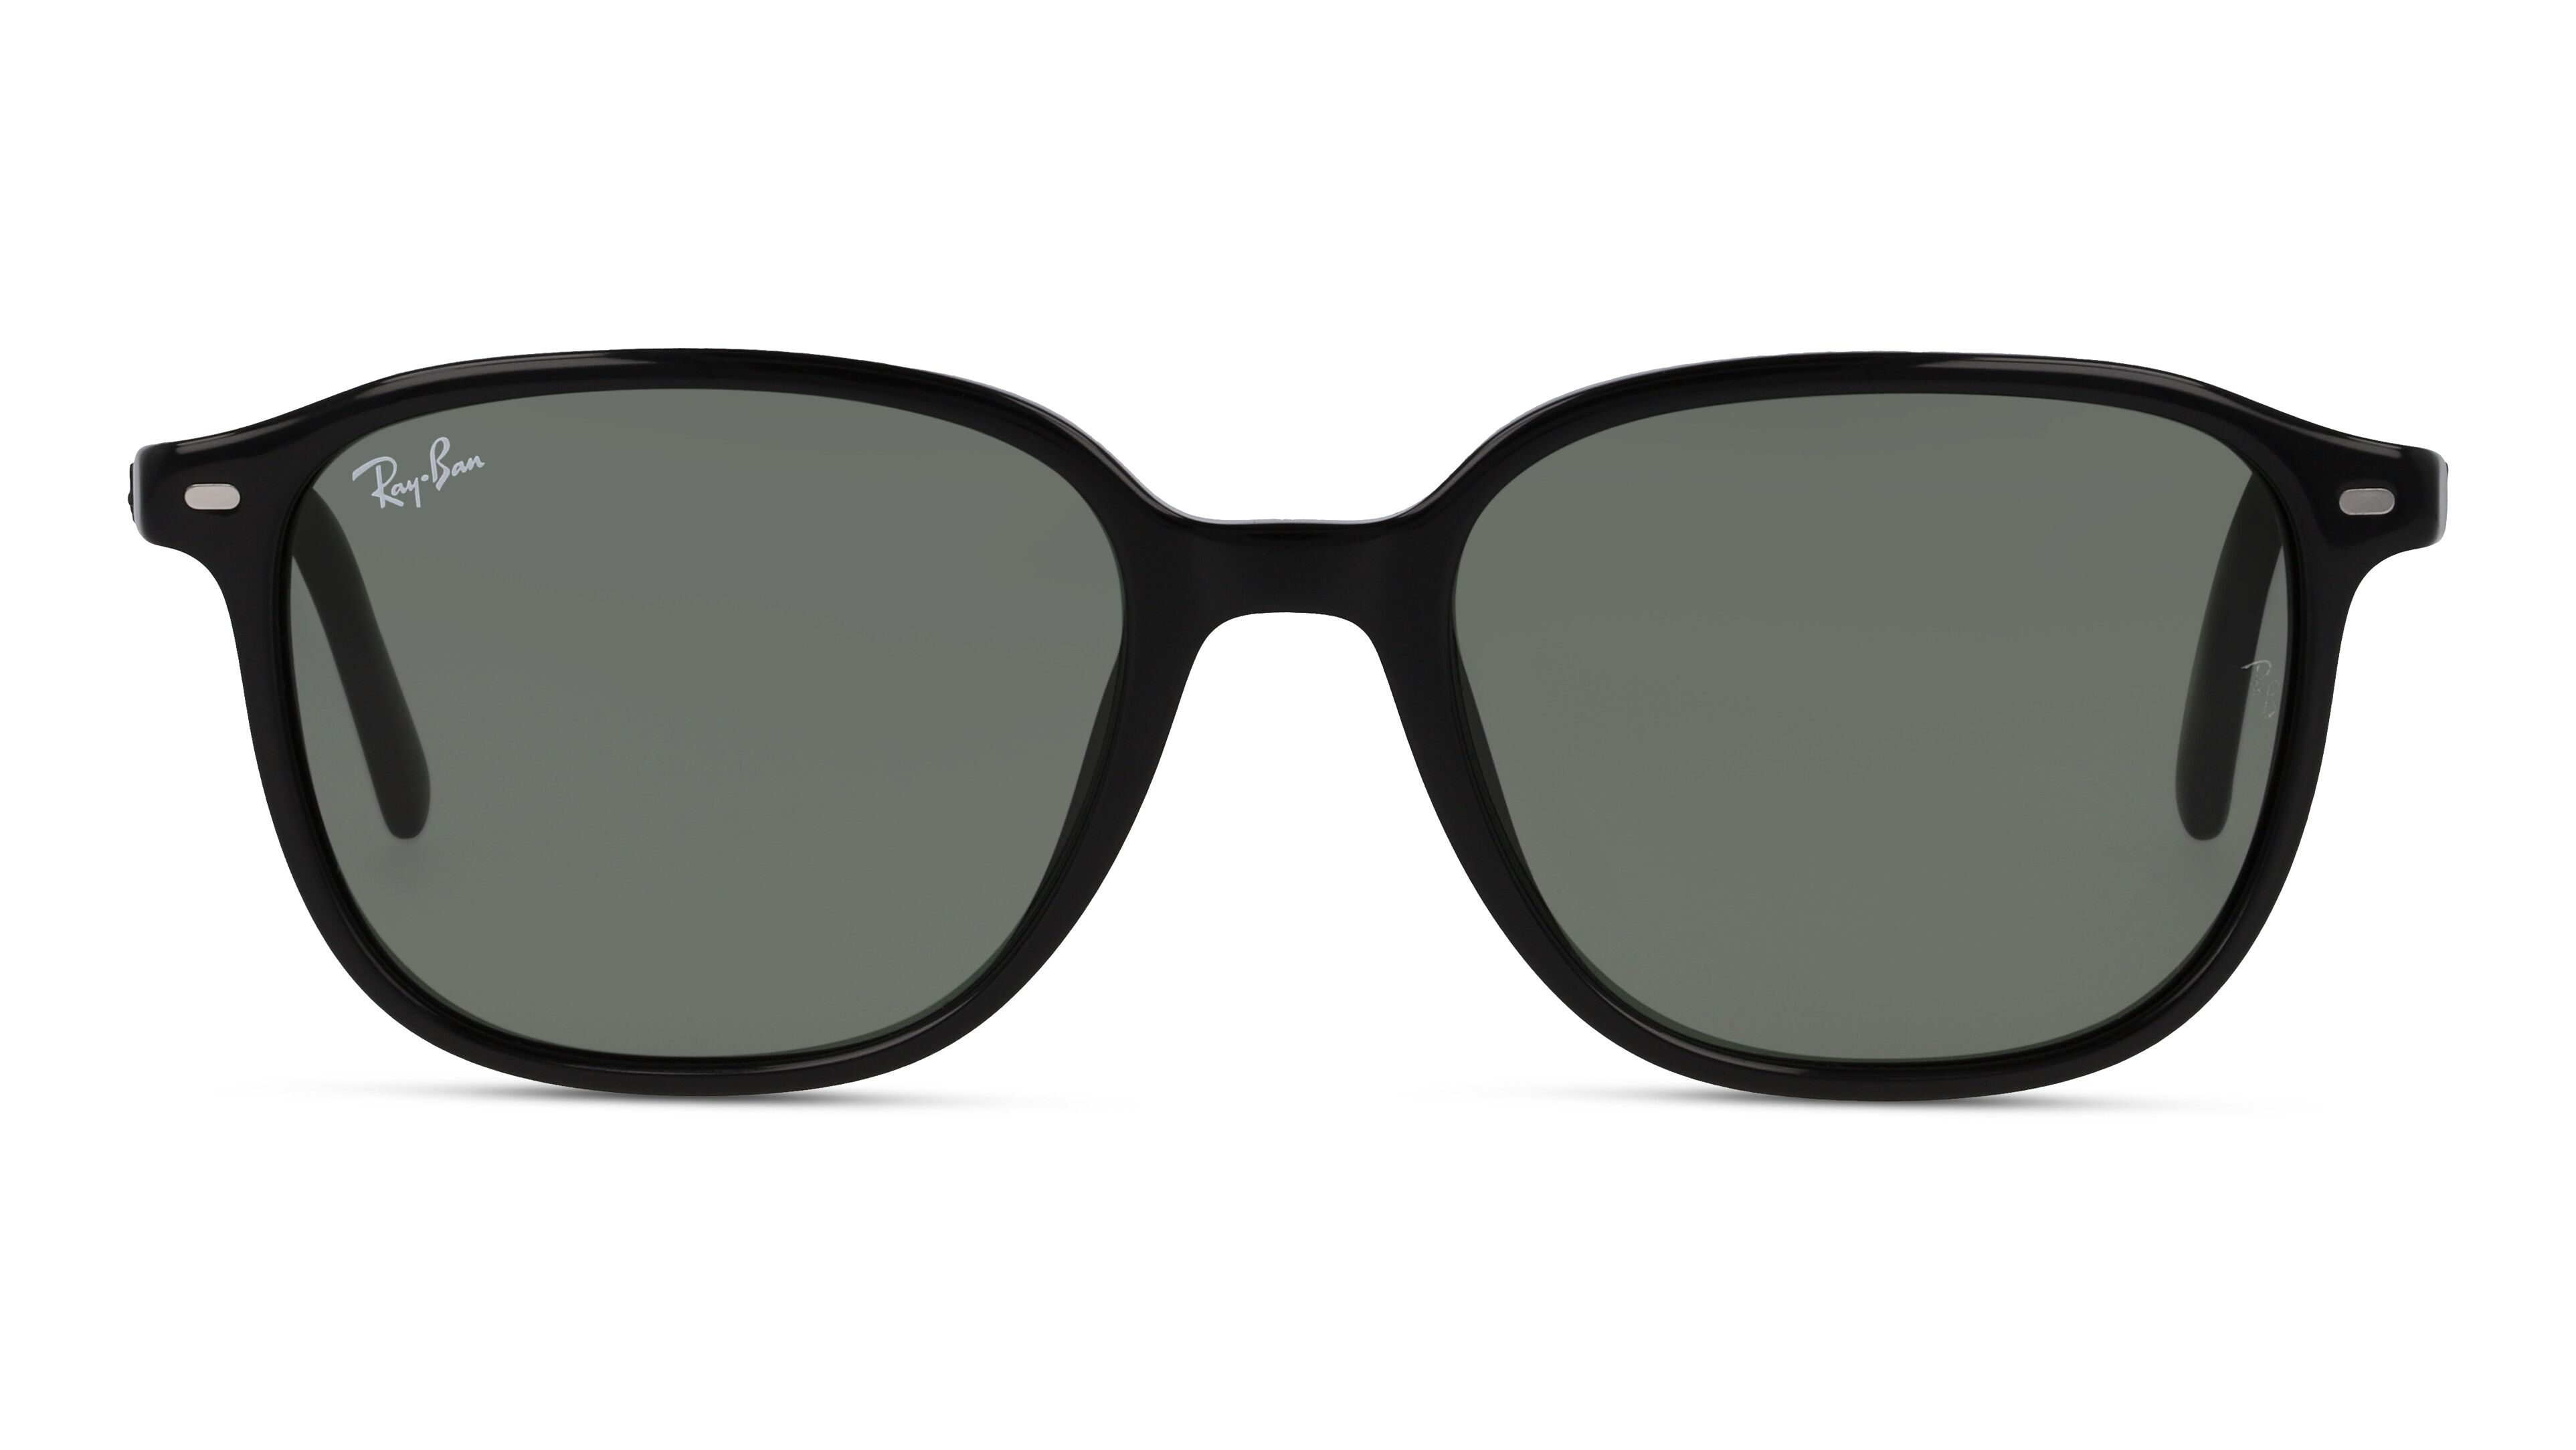 [products.image.front] Ray-Ban LEONARD 0RB2193 901/31 Sonnenbrille